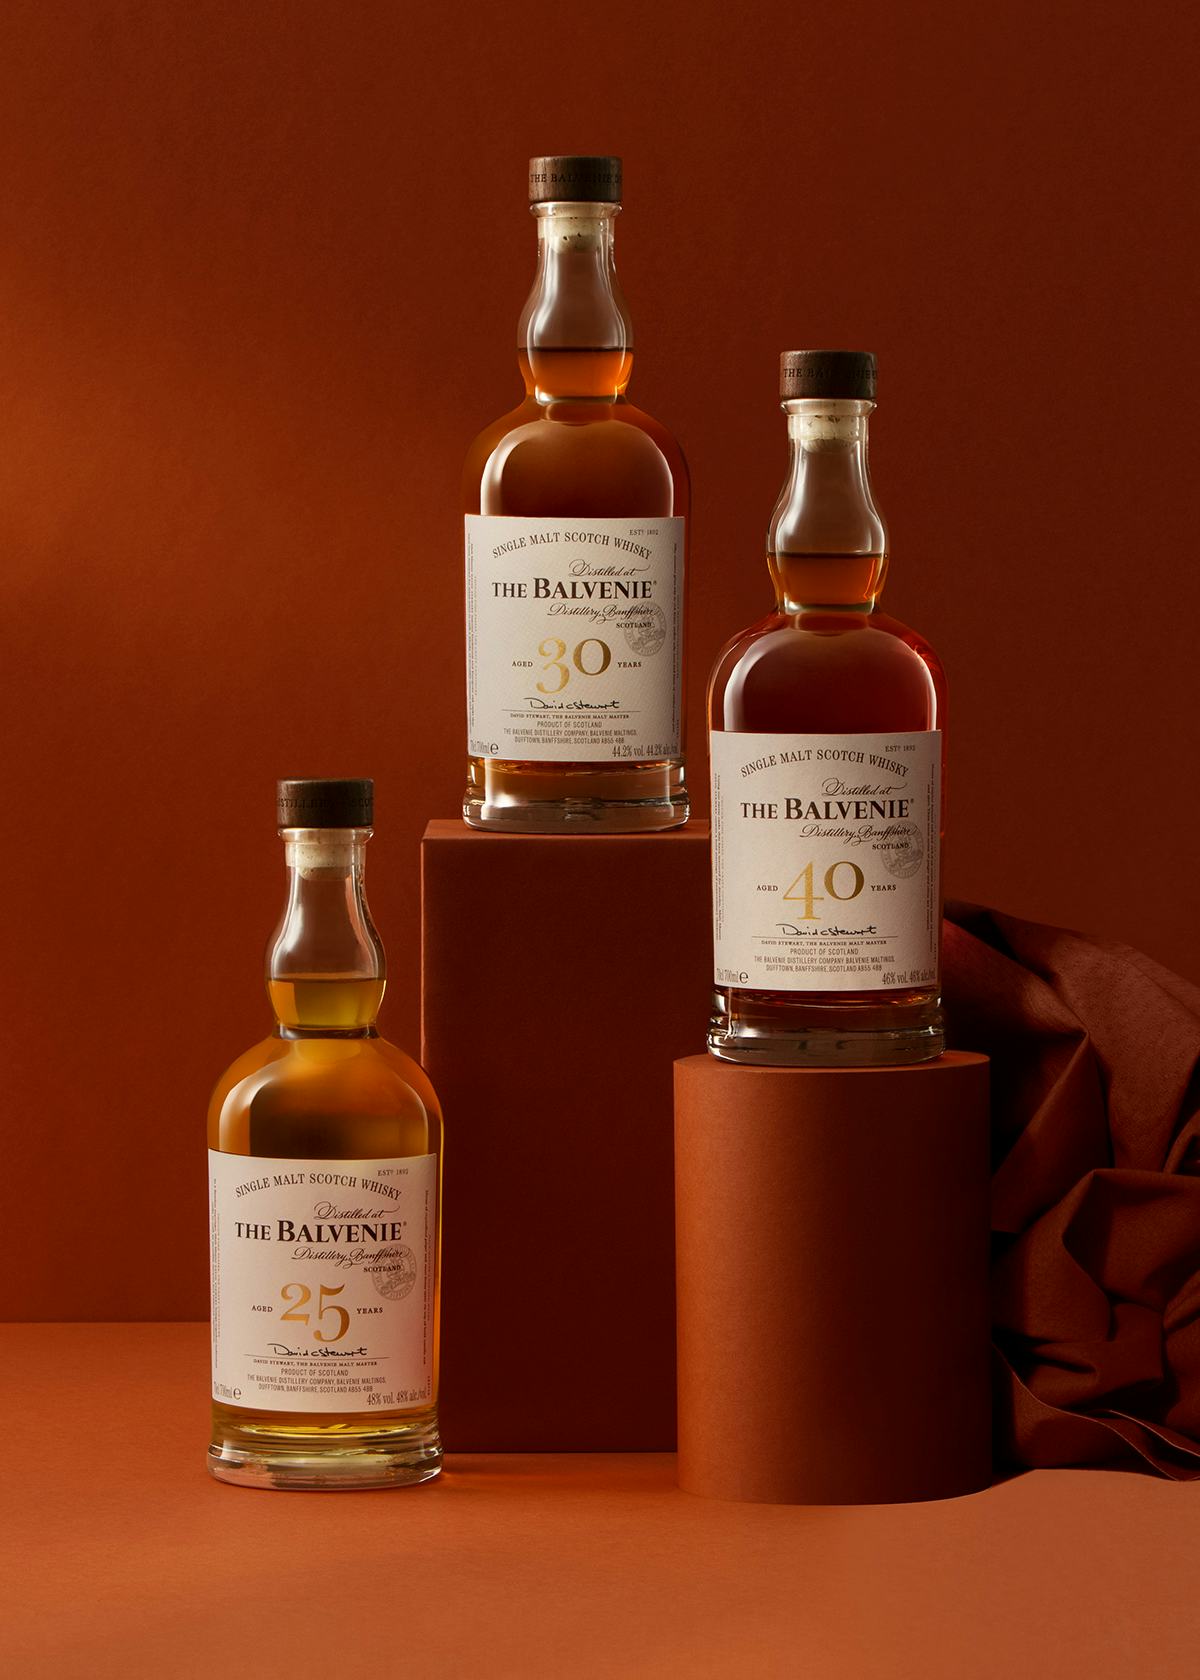 A layout image of the three Balvenie Rare Marriages whisky range bottles with a dark orange brown background.